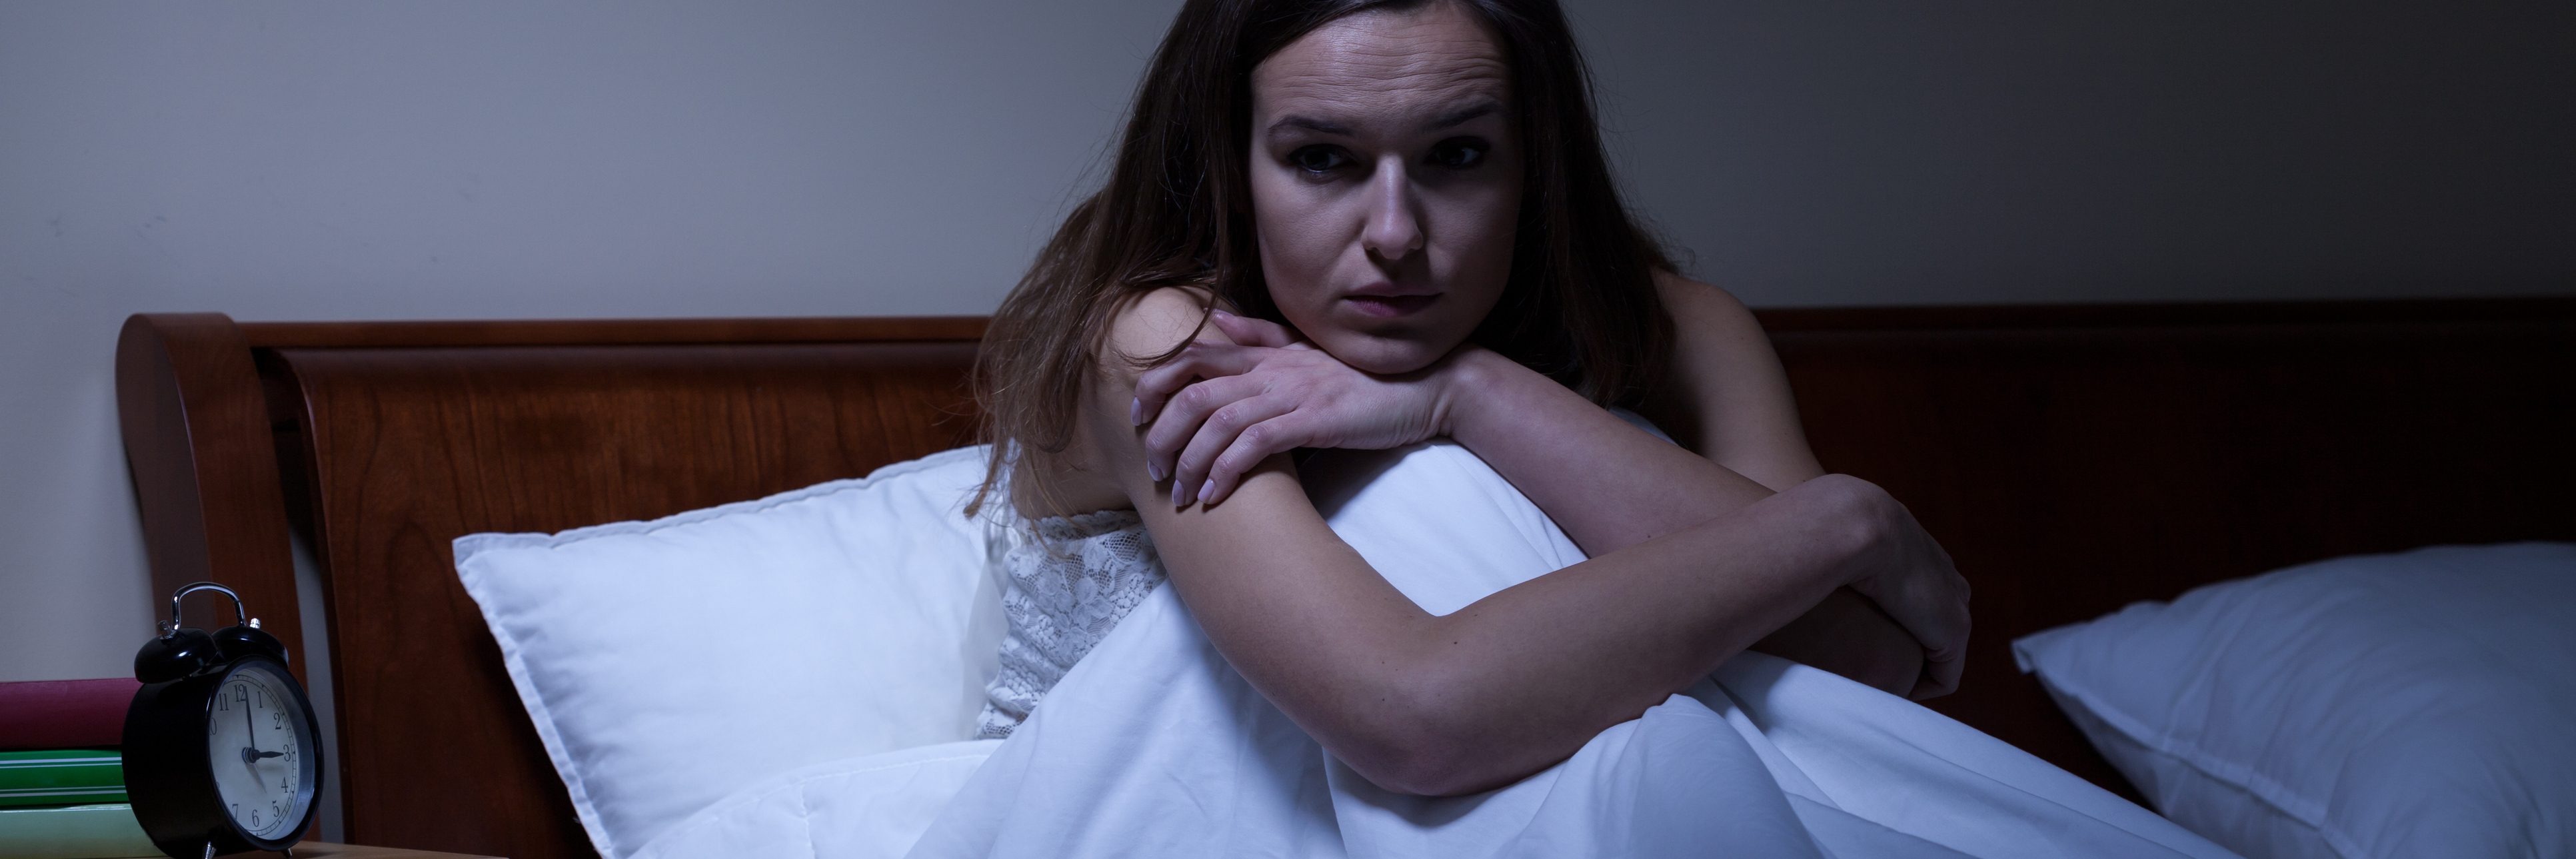 young woman with insomnia or after nightmare sitting up in bed